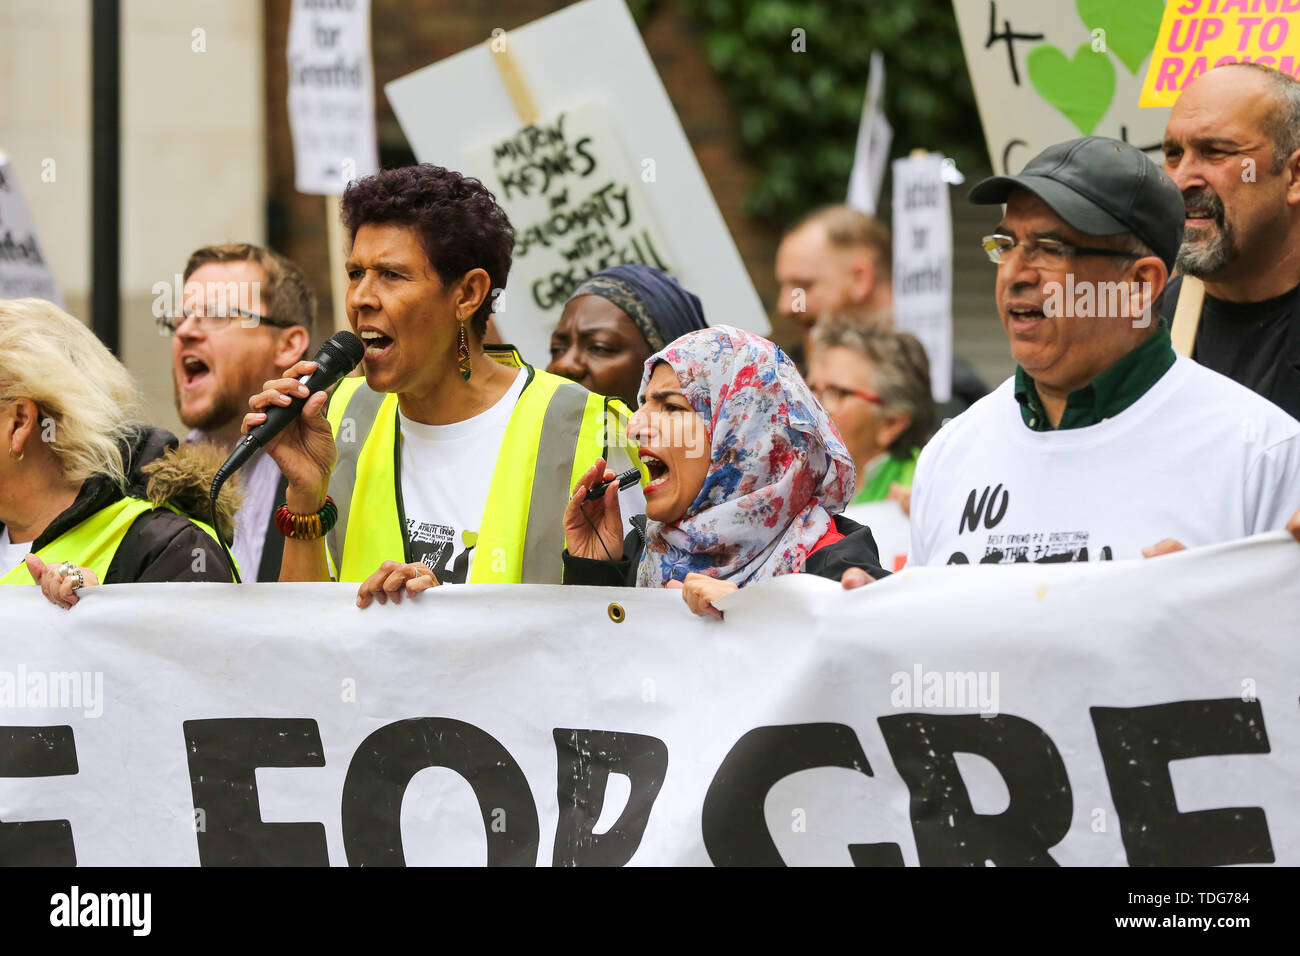 Campaigners shout slogans during the Justice for Grenfell Solidarity rally against the lack of action by the Government following the Grenfell Tower fire, in rehousing affected families, delays in the Public Inquiry, tower blocks still covered in flammable cladding, soil contamination and the performance of Royal Borough of Kensington and Chelsea. On 14 June 2017, just before 1:00 am a fire broke out in the kitchen of the fourth floor flat at the 24-storey residential tower block in North Kensington, West London, which took the lives of 72 people. More than 70 others were injured and 223 peopl Stock Photo